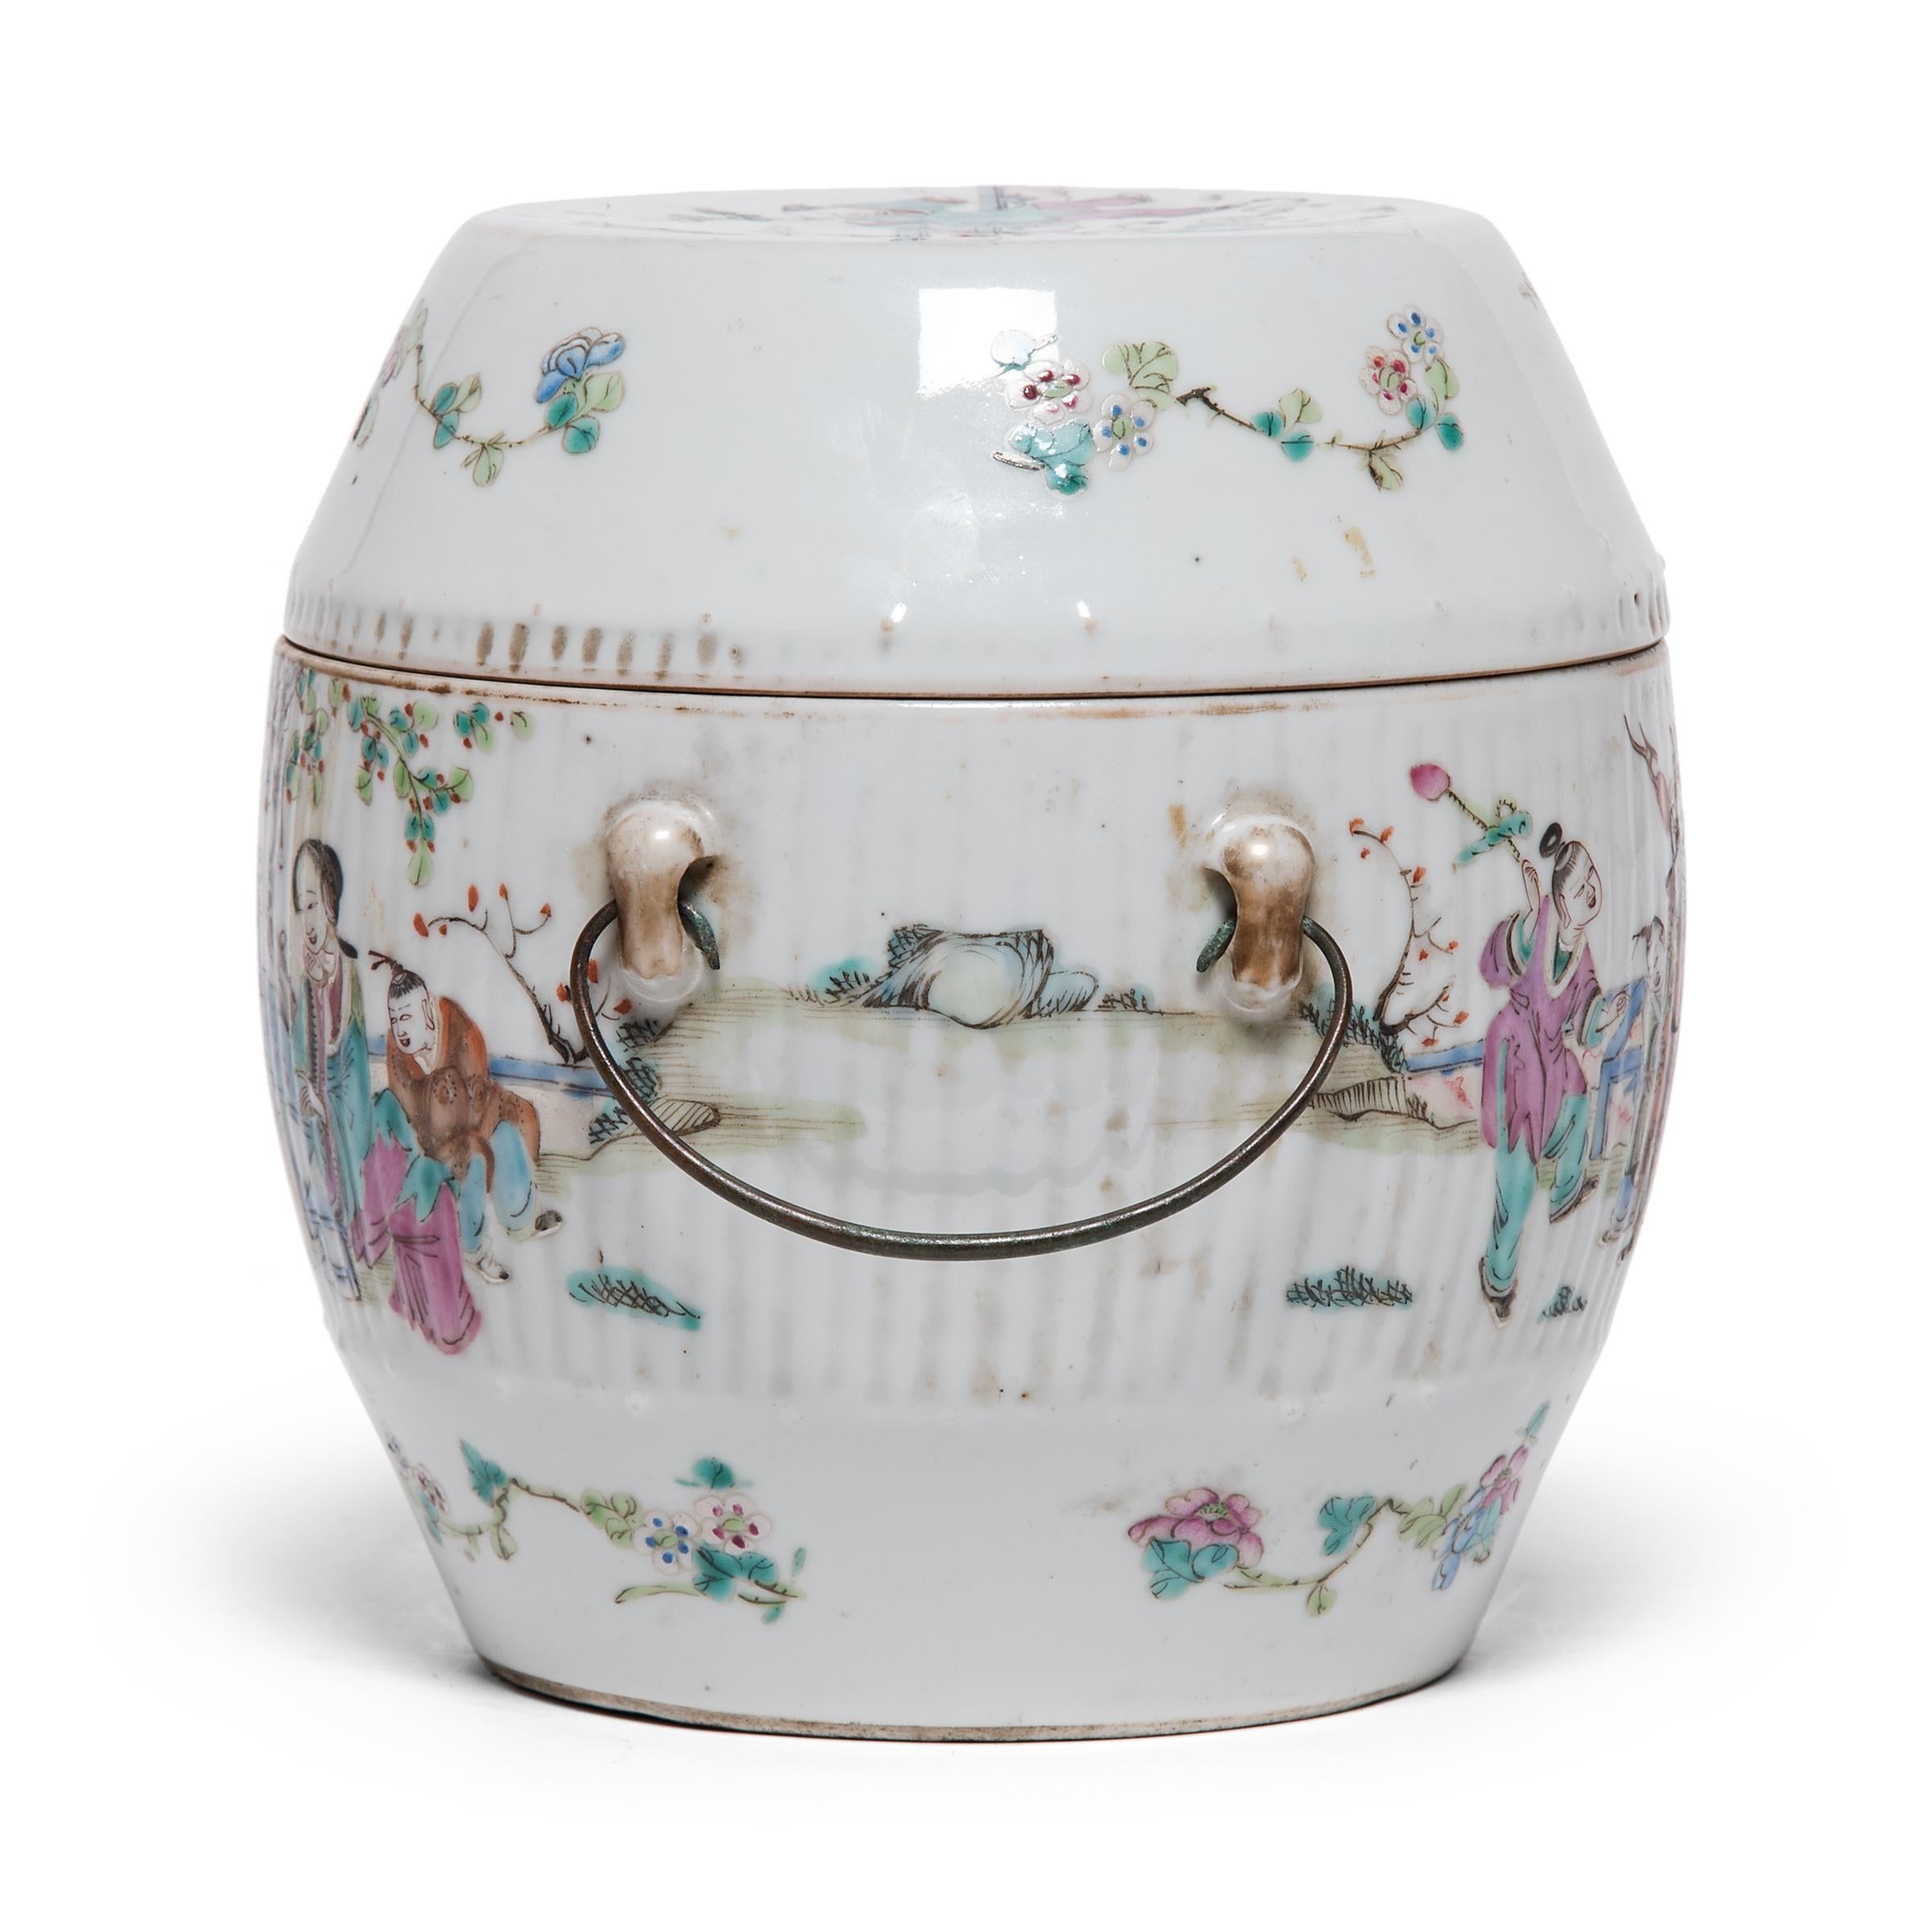 This early 20th century covered jar takes its rounded shape from serving tureens used to serve soups and stews. Contrasted by a crisp white field, the lid and sides are decorated with a lively scene of children at play in a courtyard garden.